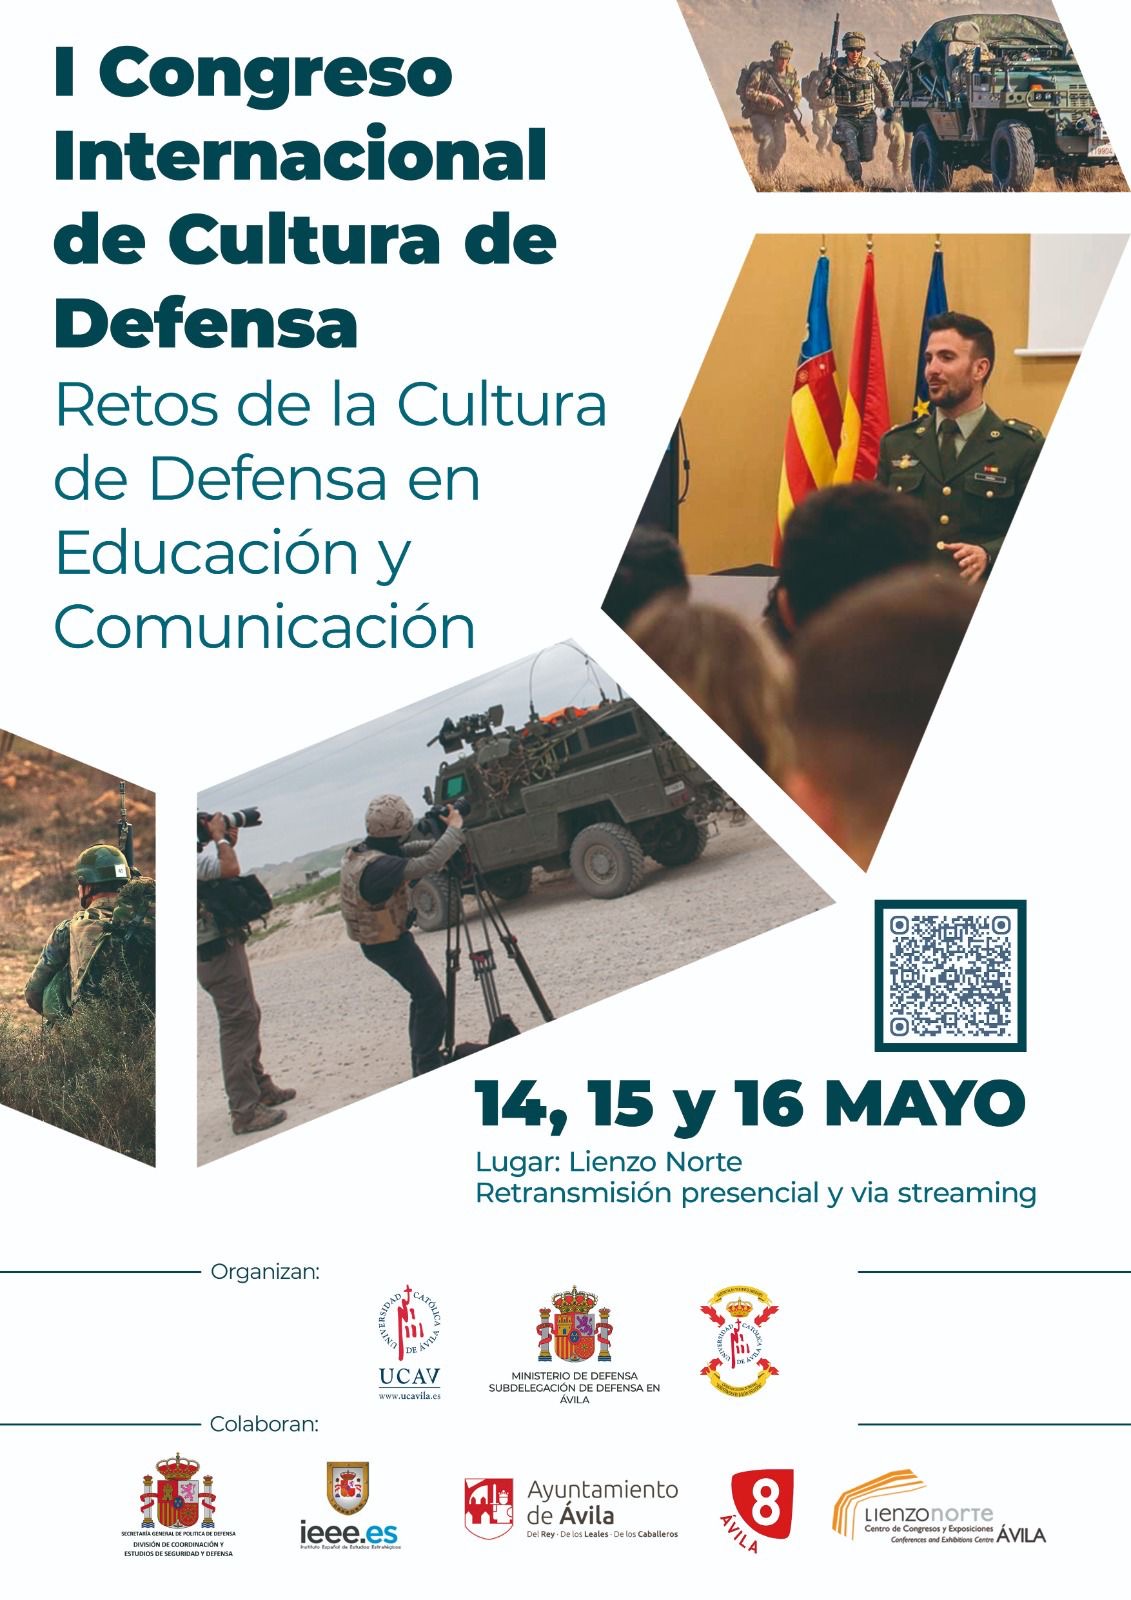 The International Congress of culture of Defence. 